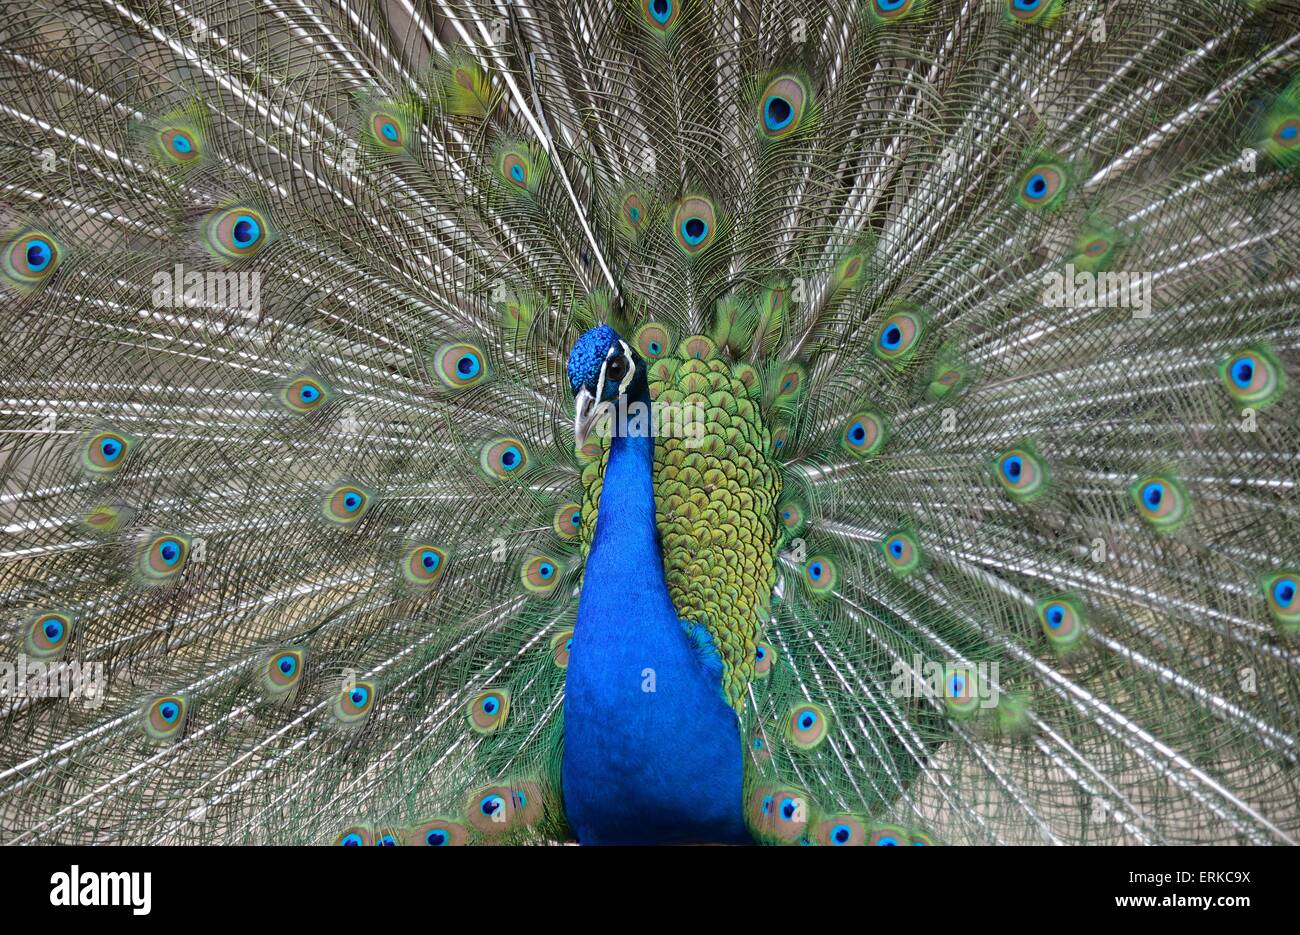 Blue Peacock (Pavo cristatus), courtship display with spread feathers, Majorca, Balearic Islands, Spain Stock Photo